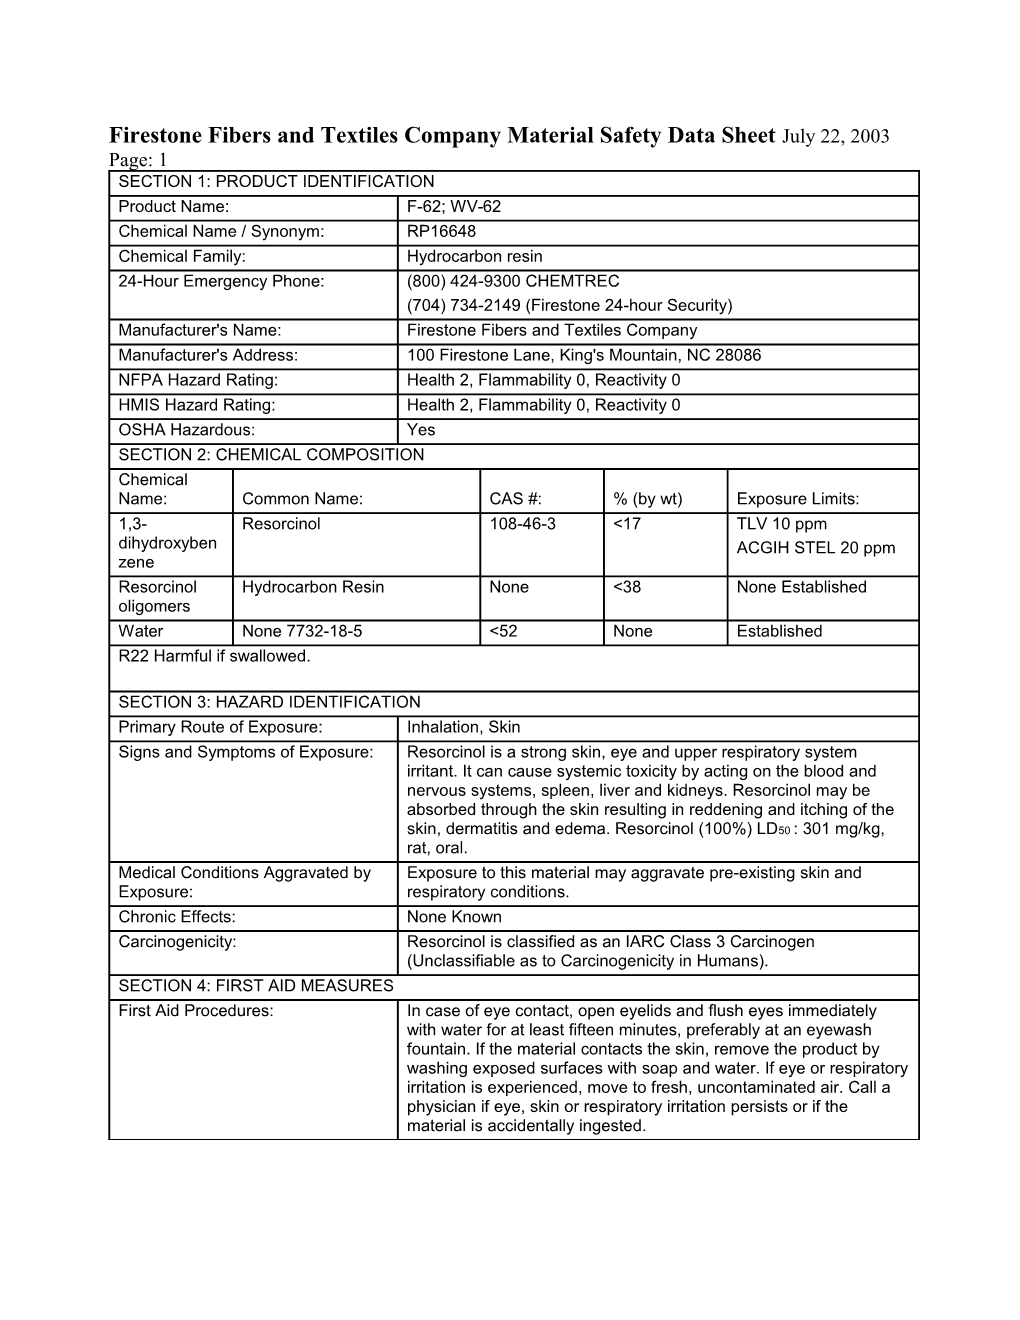 Firestone Fibers and Textiles Company Material Safety Data Sheet July 10, 2003 Page: 1